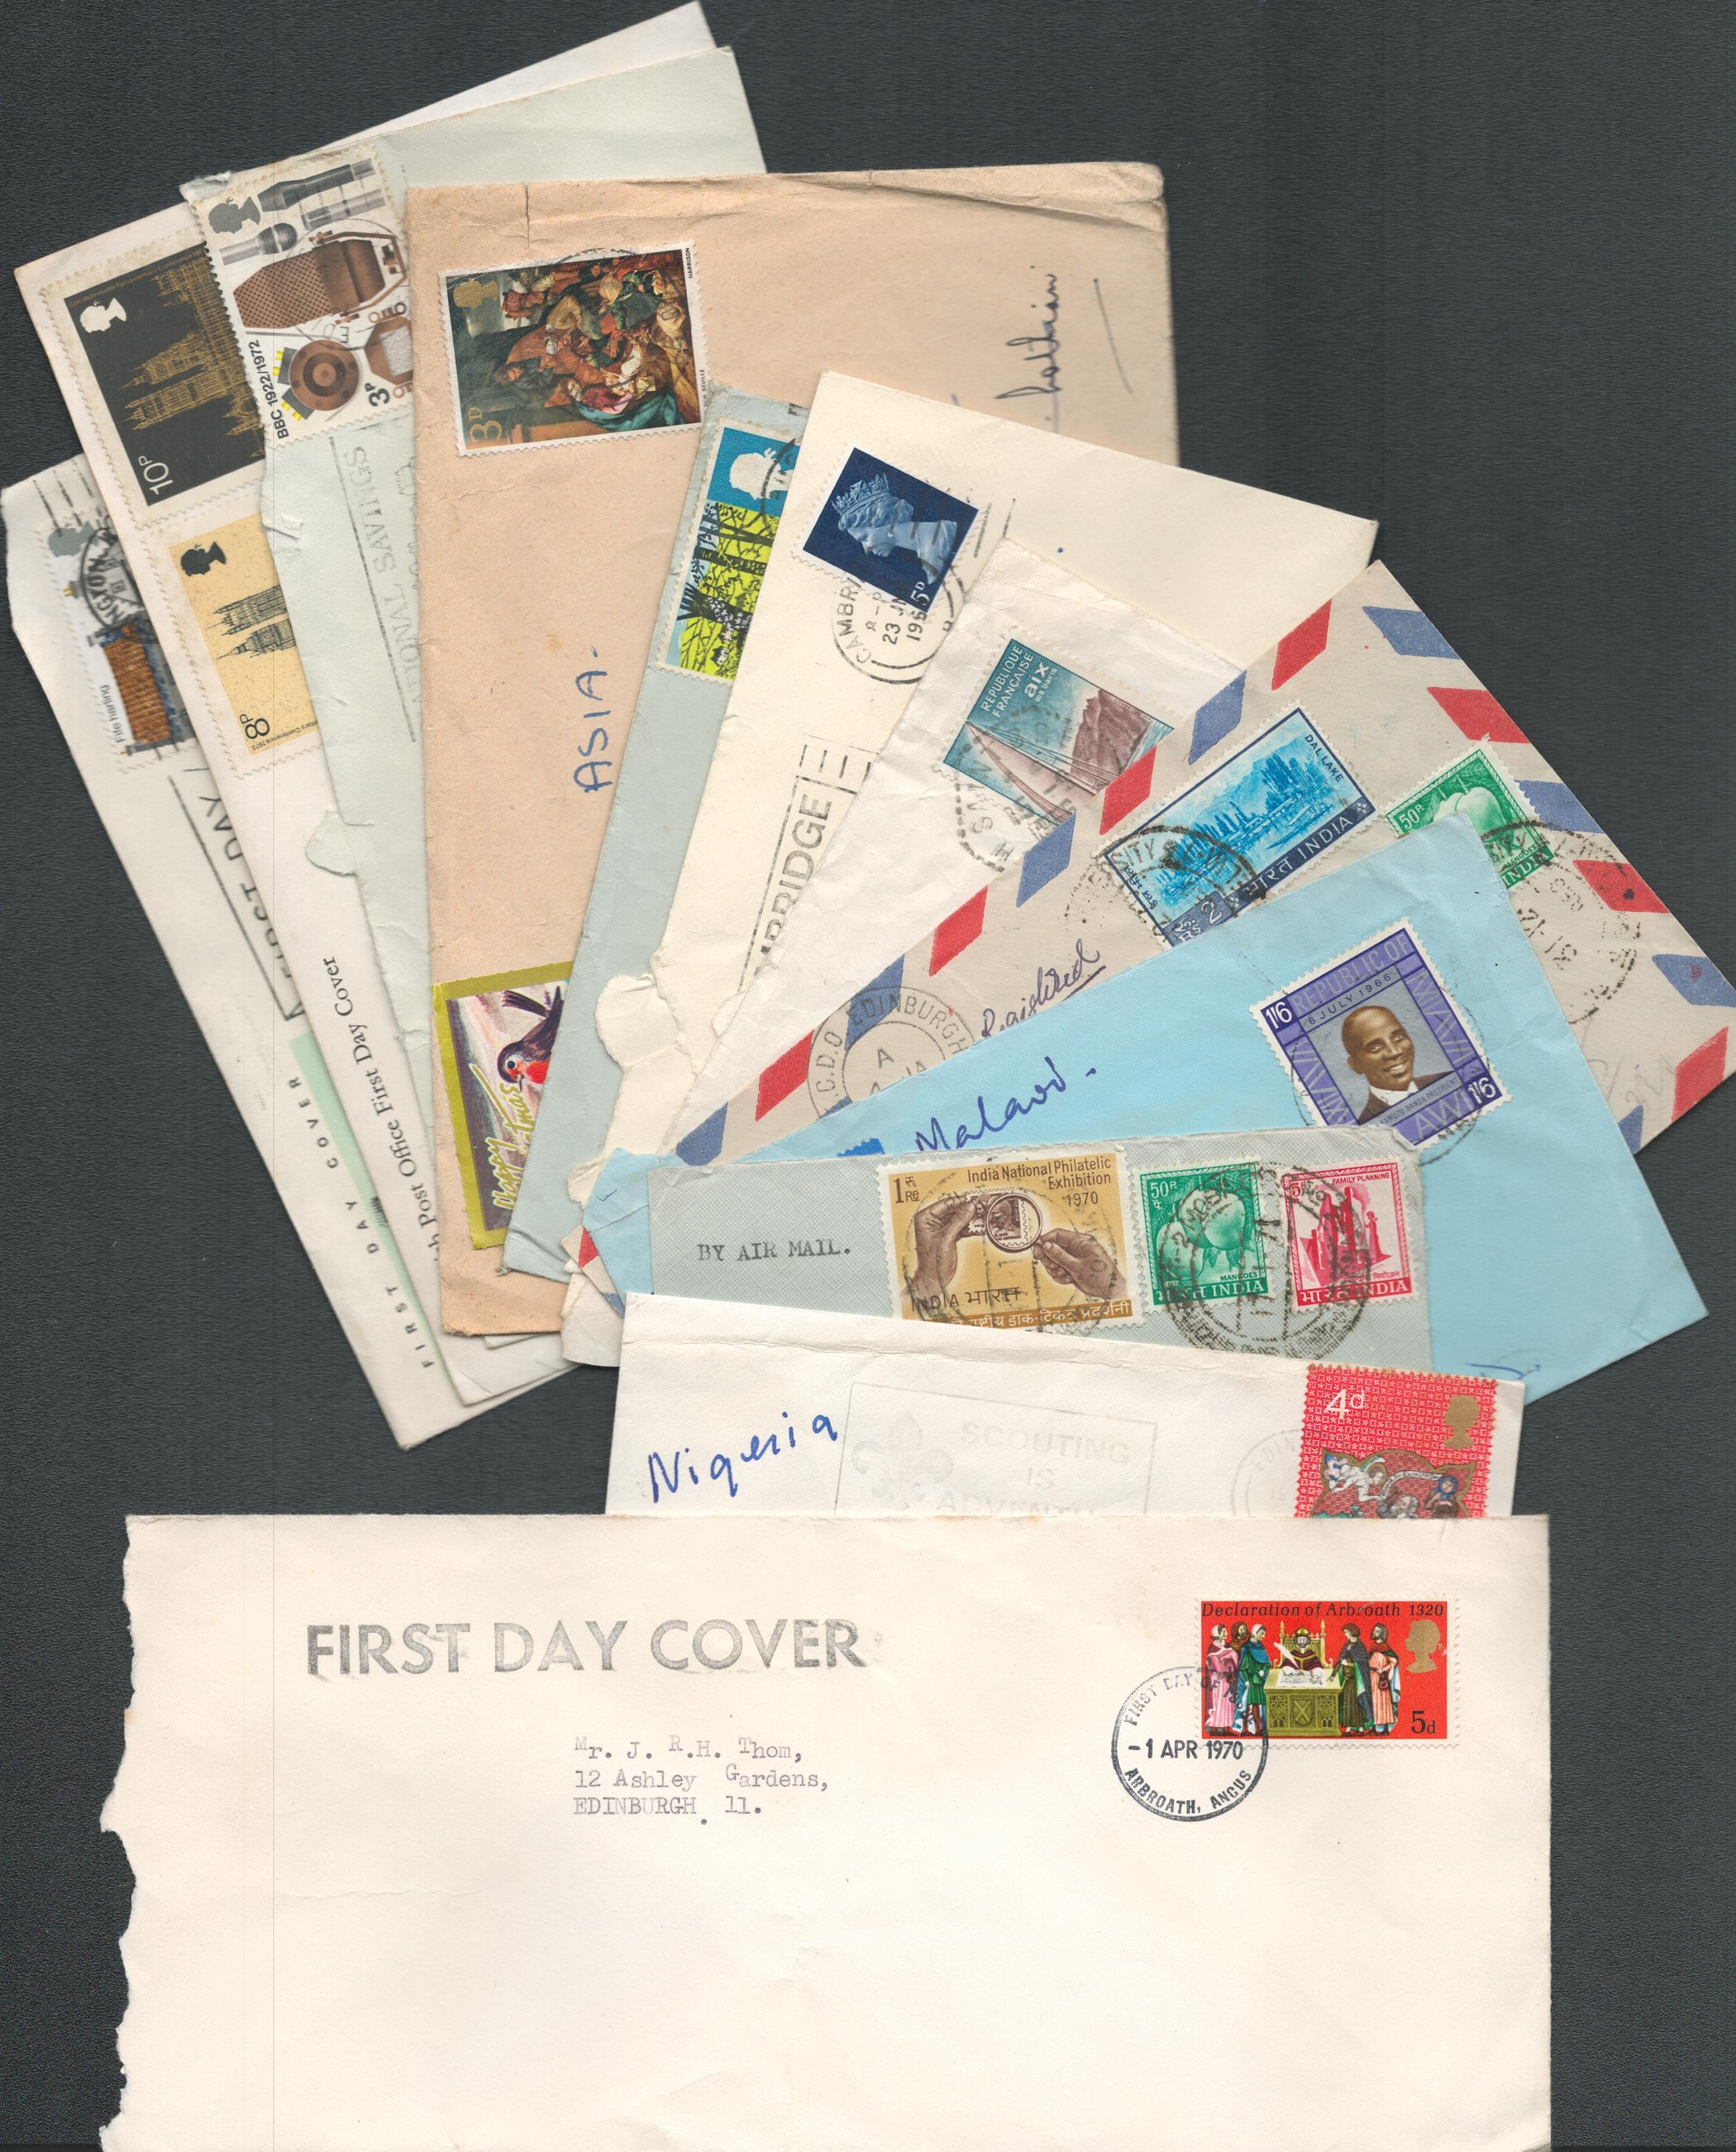 Assorted mailing envelopes from around the world. Over 20 included. Good condition. We combine